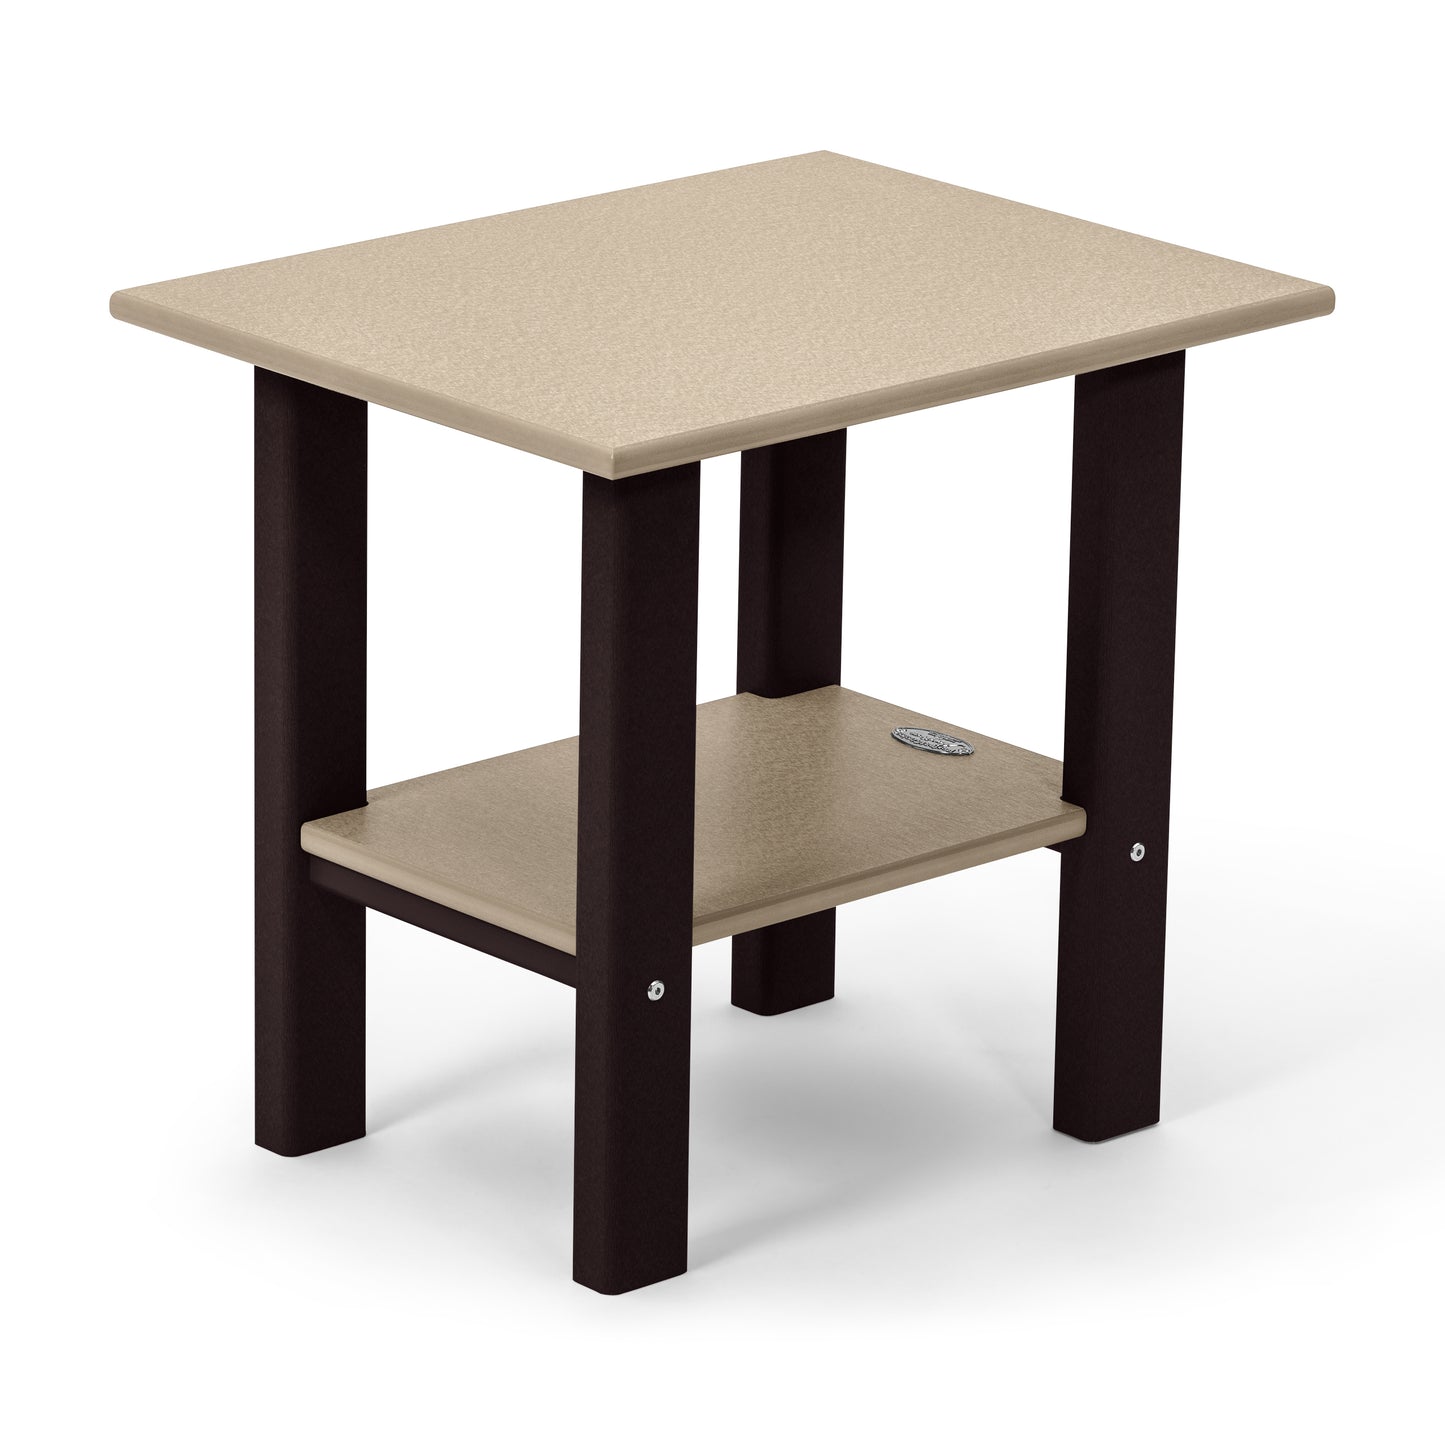 Perfect Choice Furniture Recycled Plastic Stanton Side Table - LEAD TIME TO SHIP 4 WEEKS OR LESS